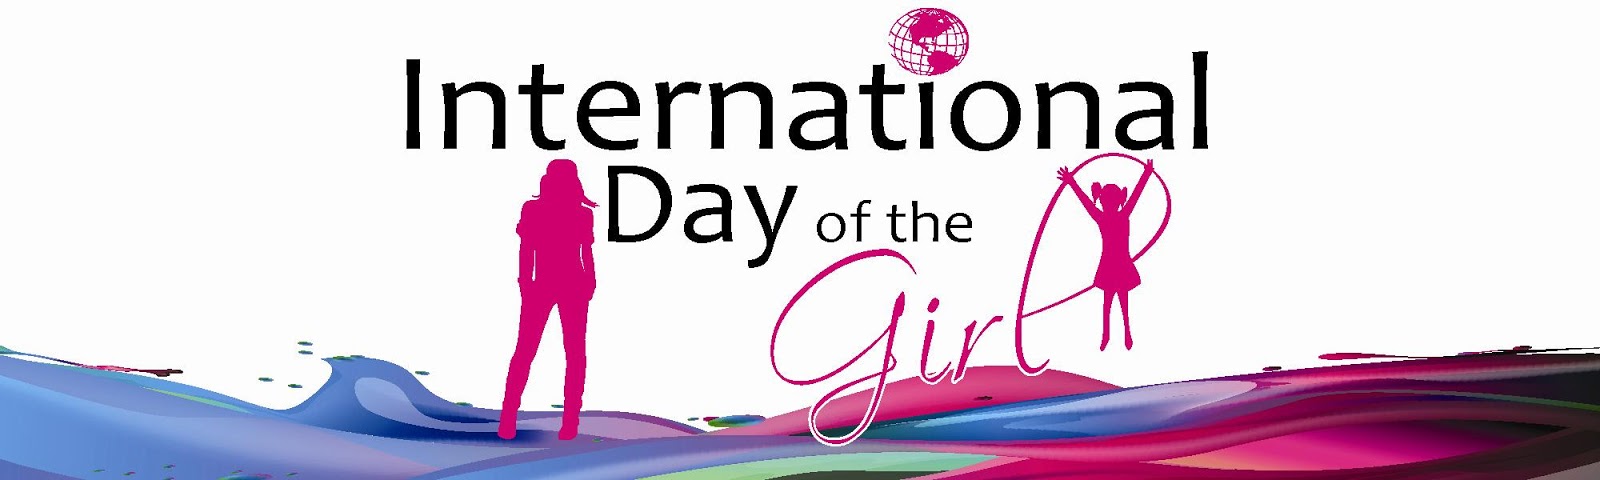 International Day of the Girl Facebook Cover Picture